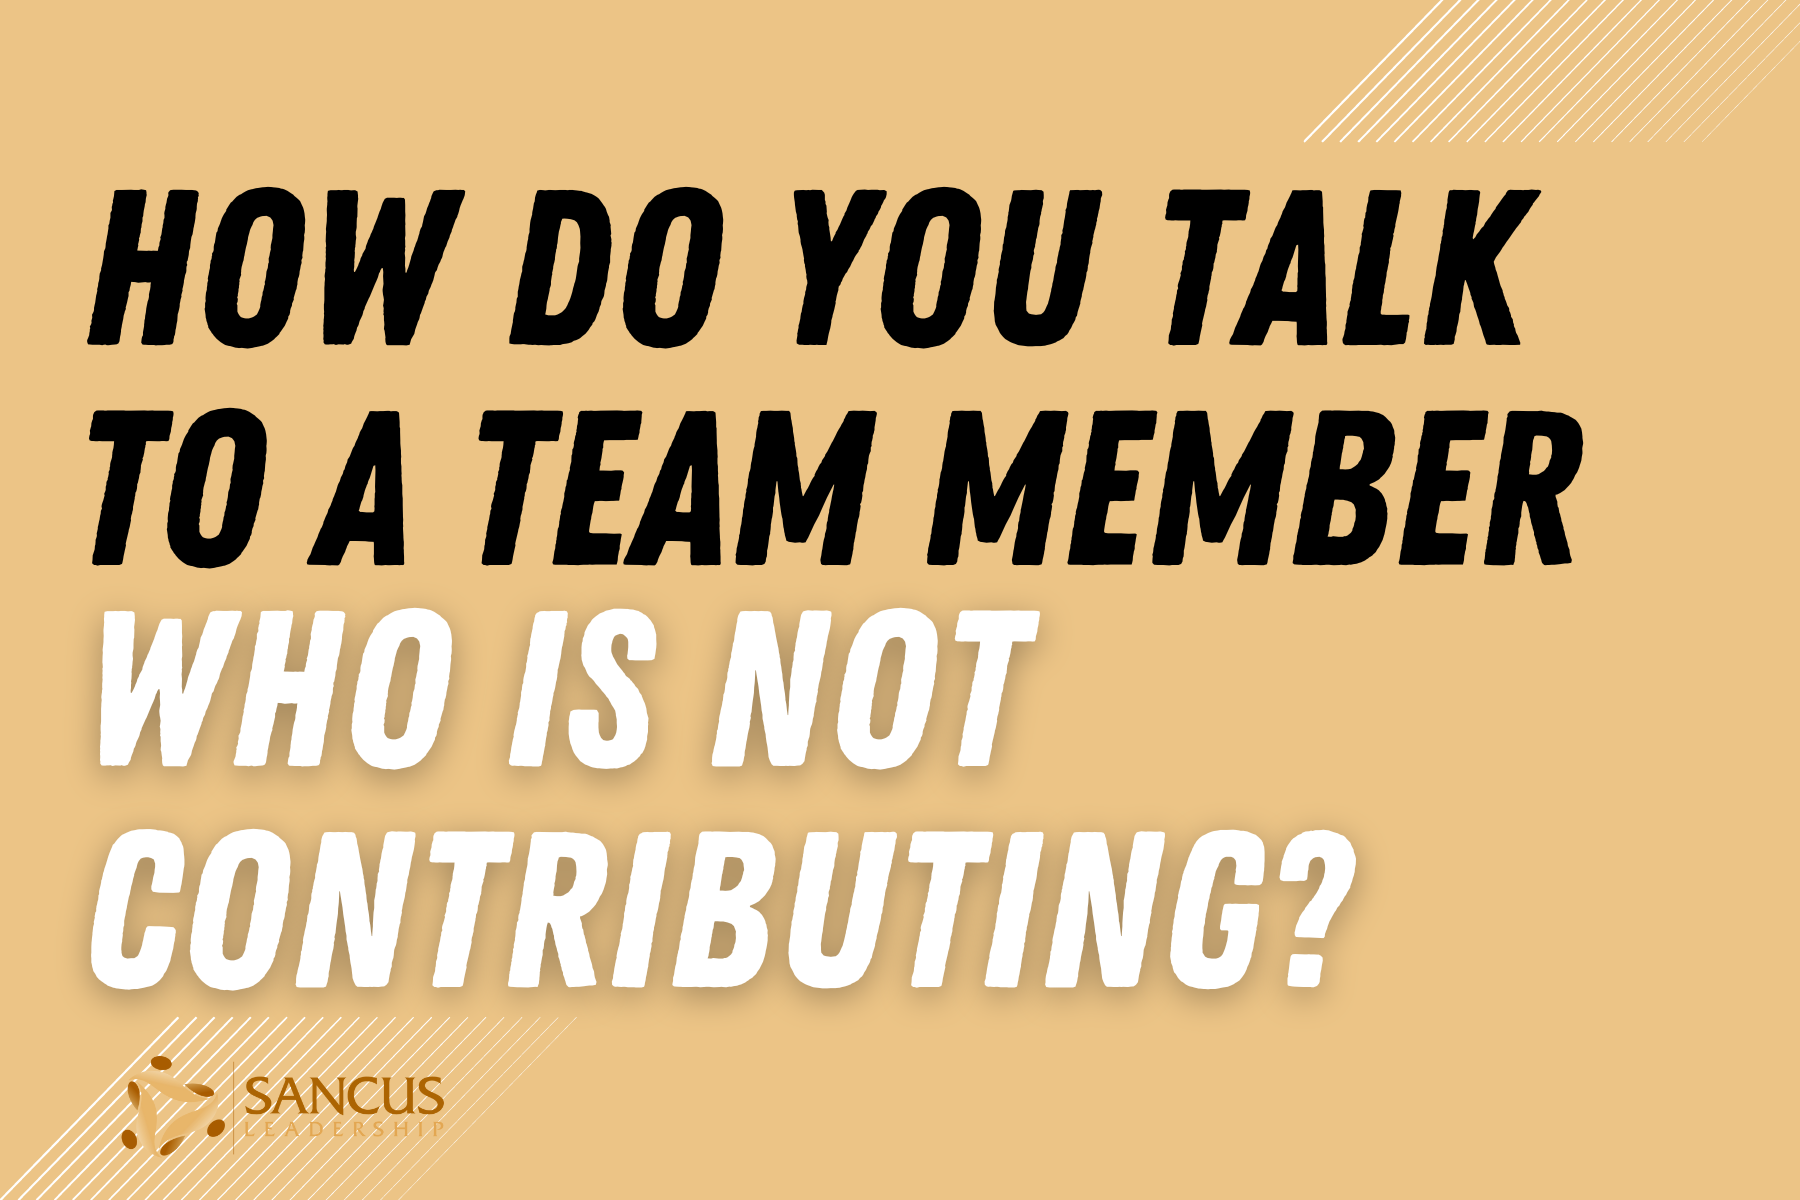 How Do You Talk to a Team Member Who Is Not Contributing?